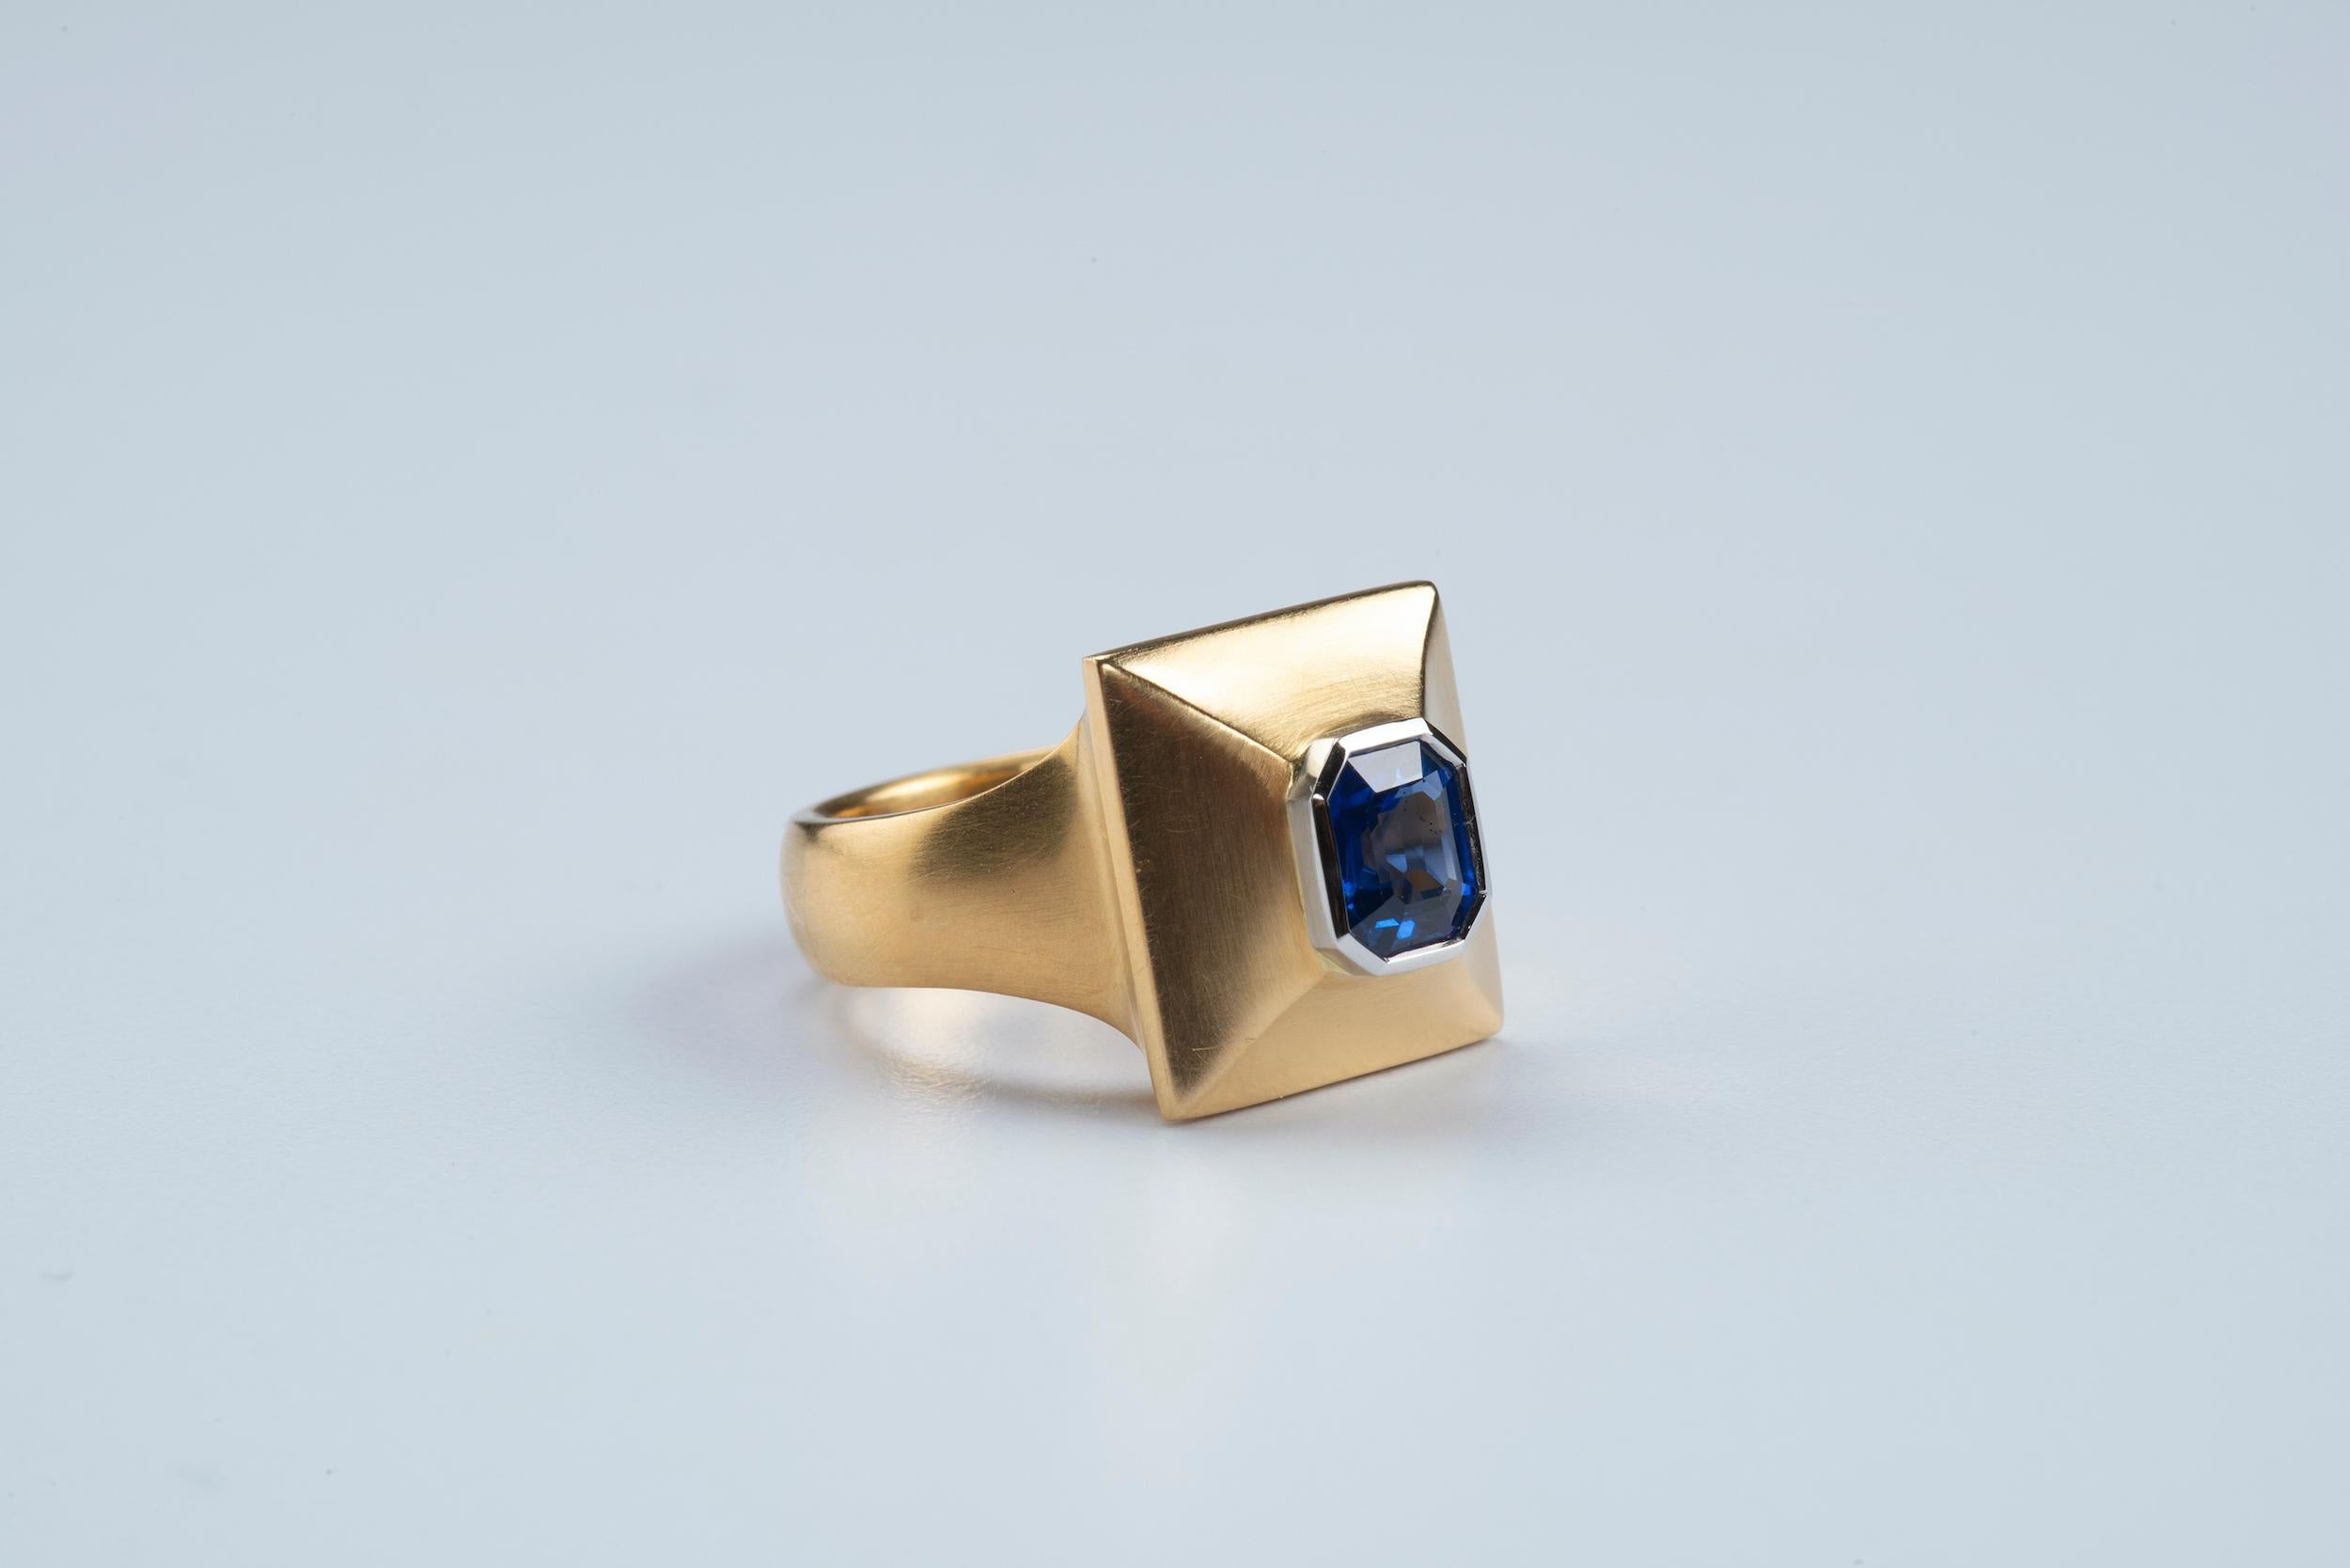 Color, composition and craft: this ring celebrates all three to the fullest. This beautiful, brilliant blue  1.34 ct emerald-shaped sapphire is nestled in a platinum bezel atop a carefully sculpted mound of 22k Fairmined gold. I picked this sapphire